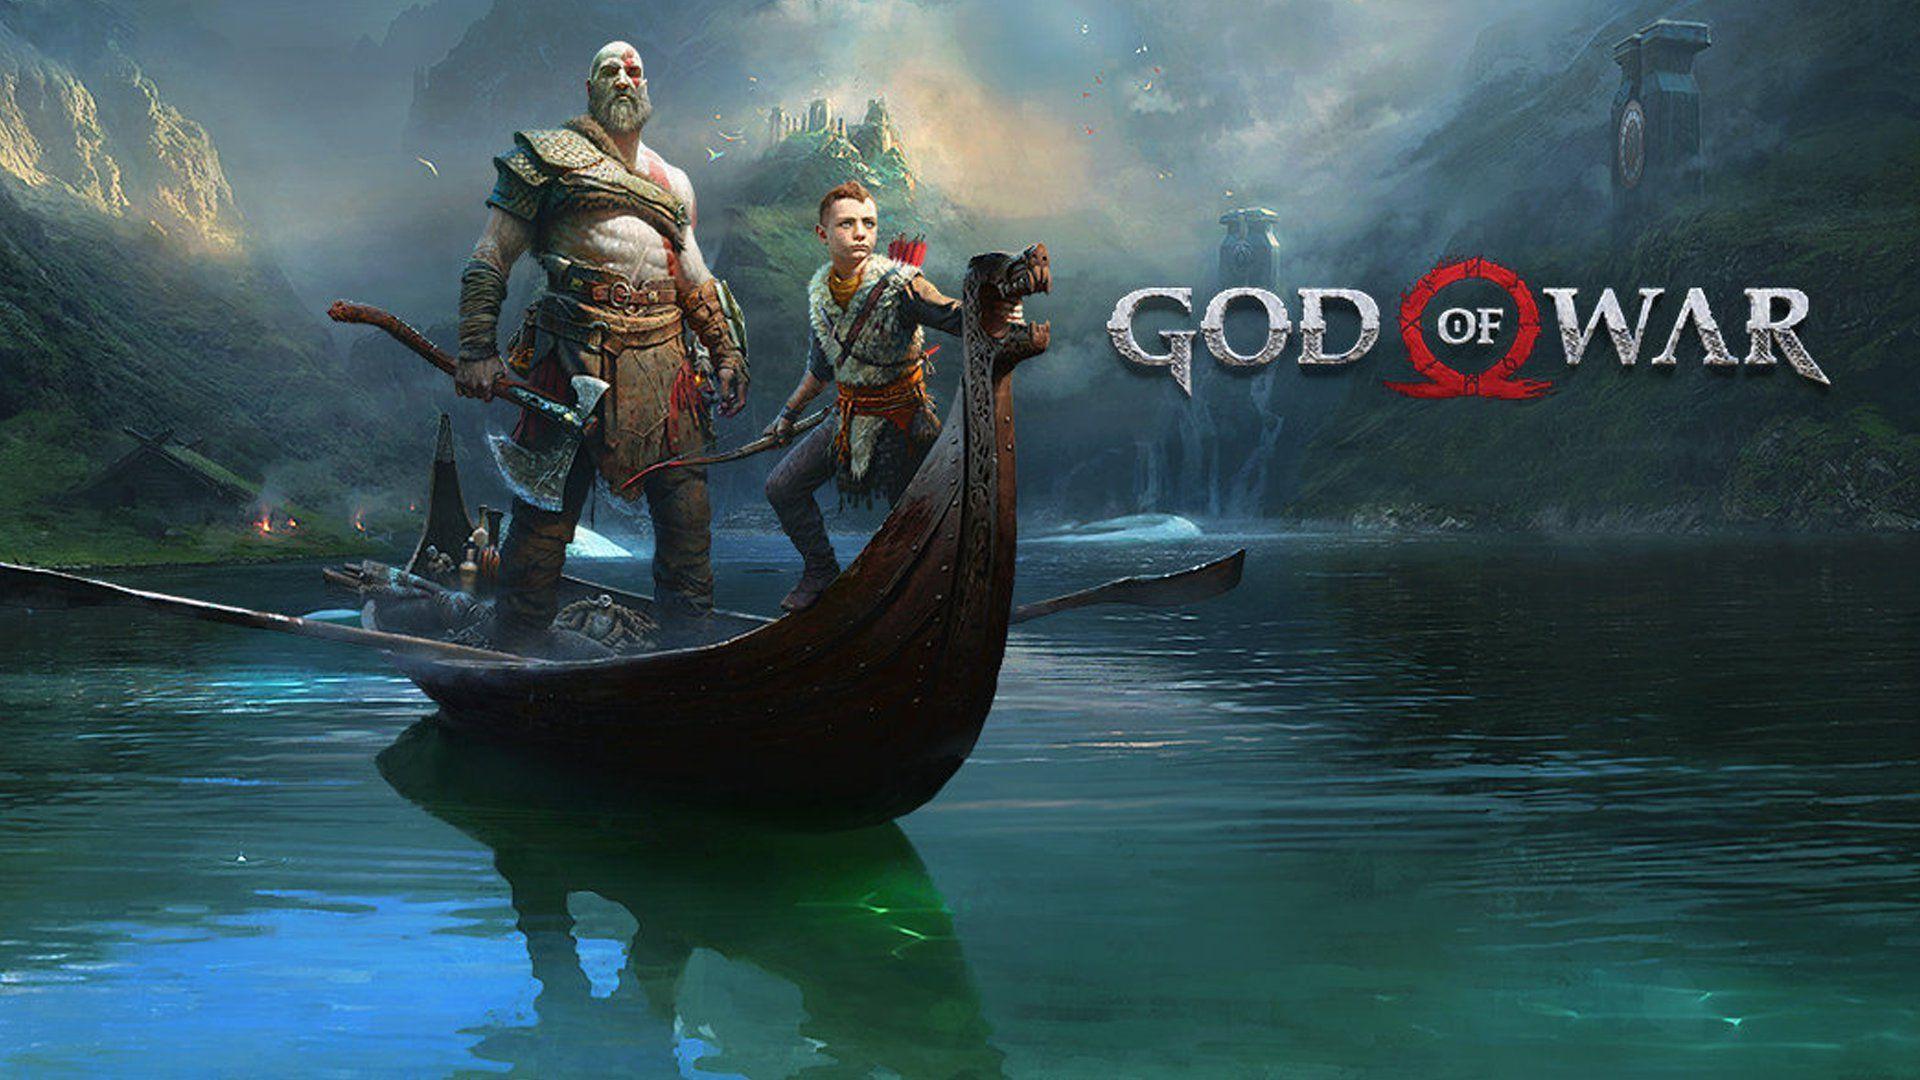 An image displaying Kratos and Atreus from God of War which is on discount during Steam Summer Sale 2023